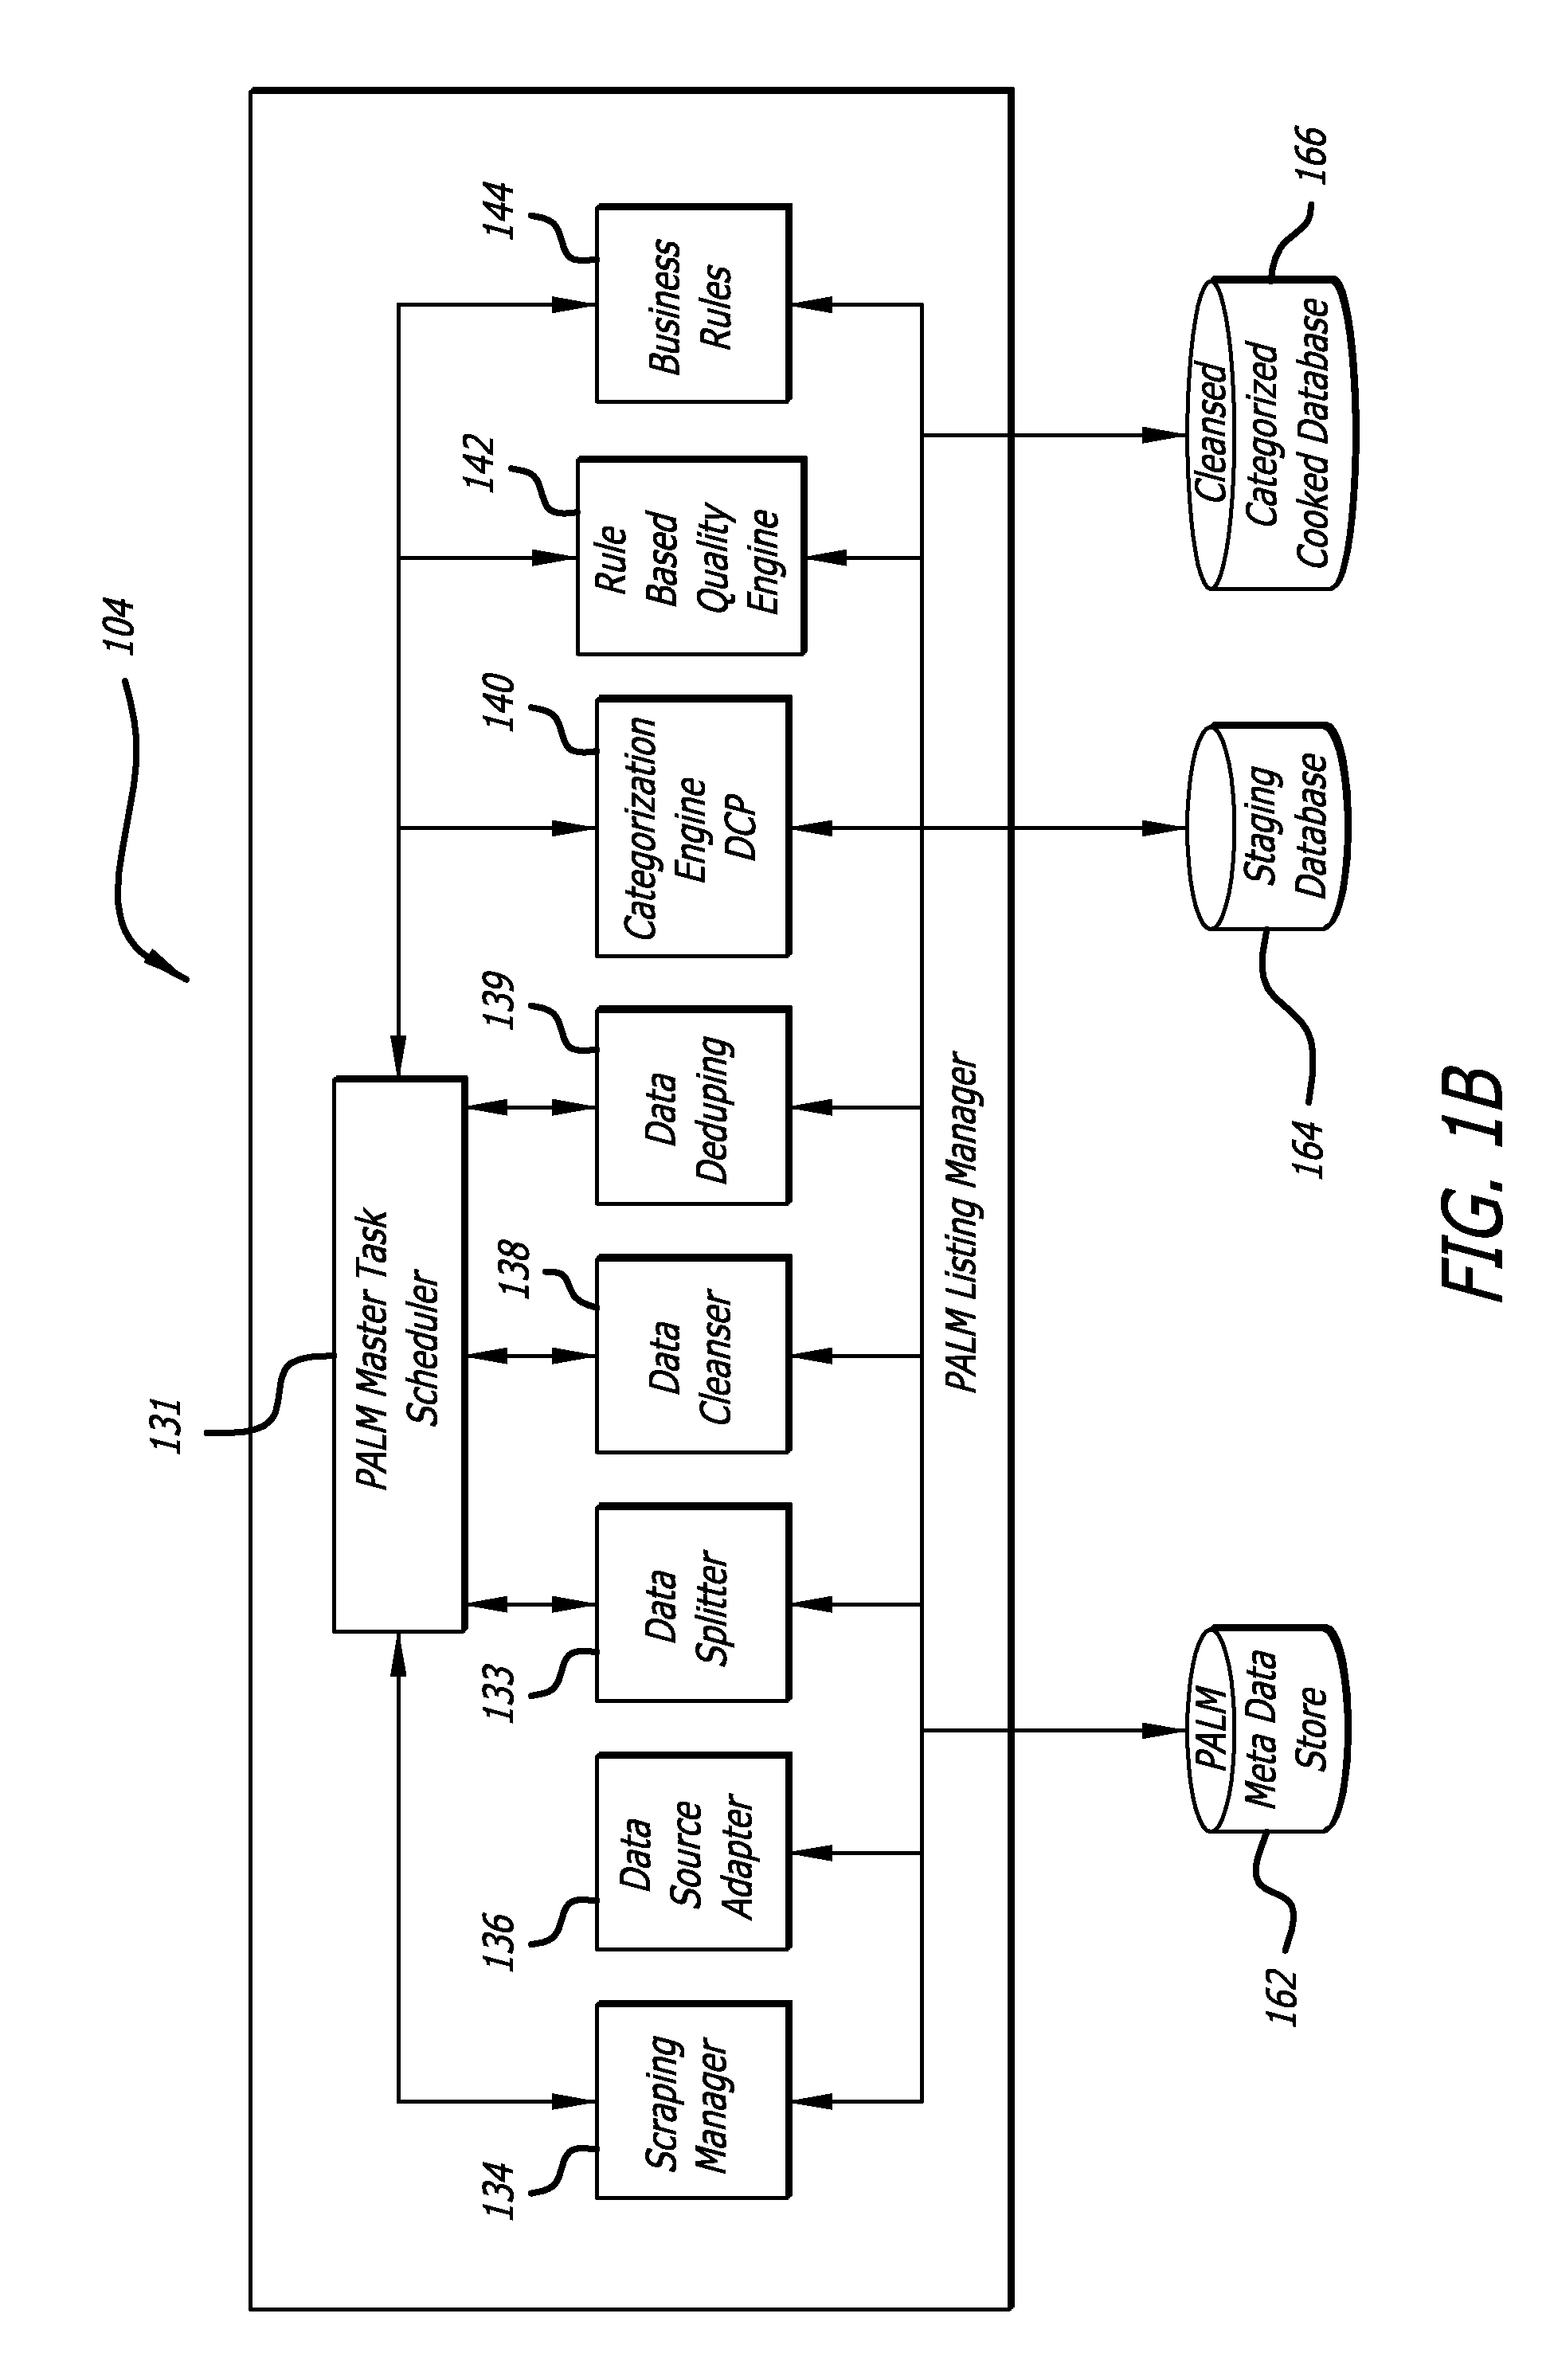 System and method for managing listings